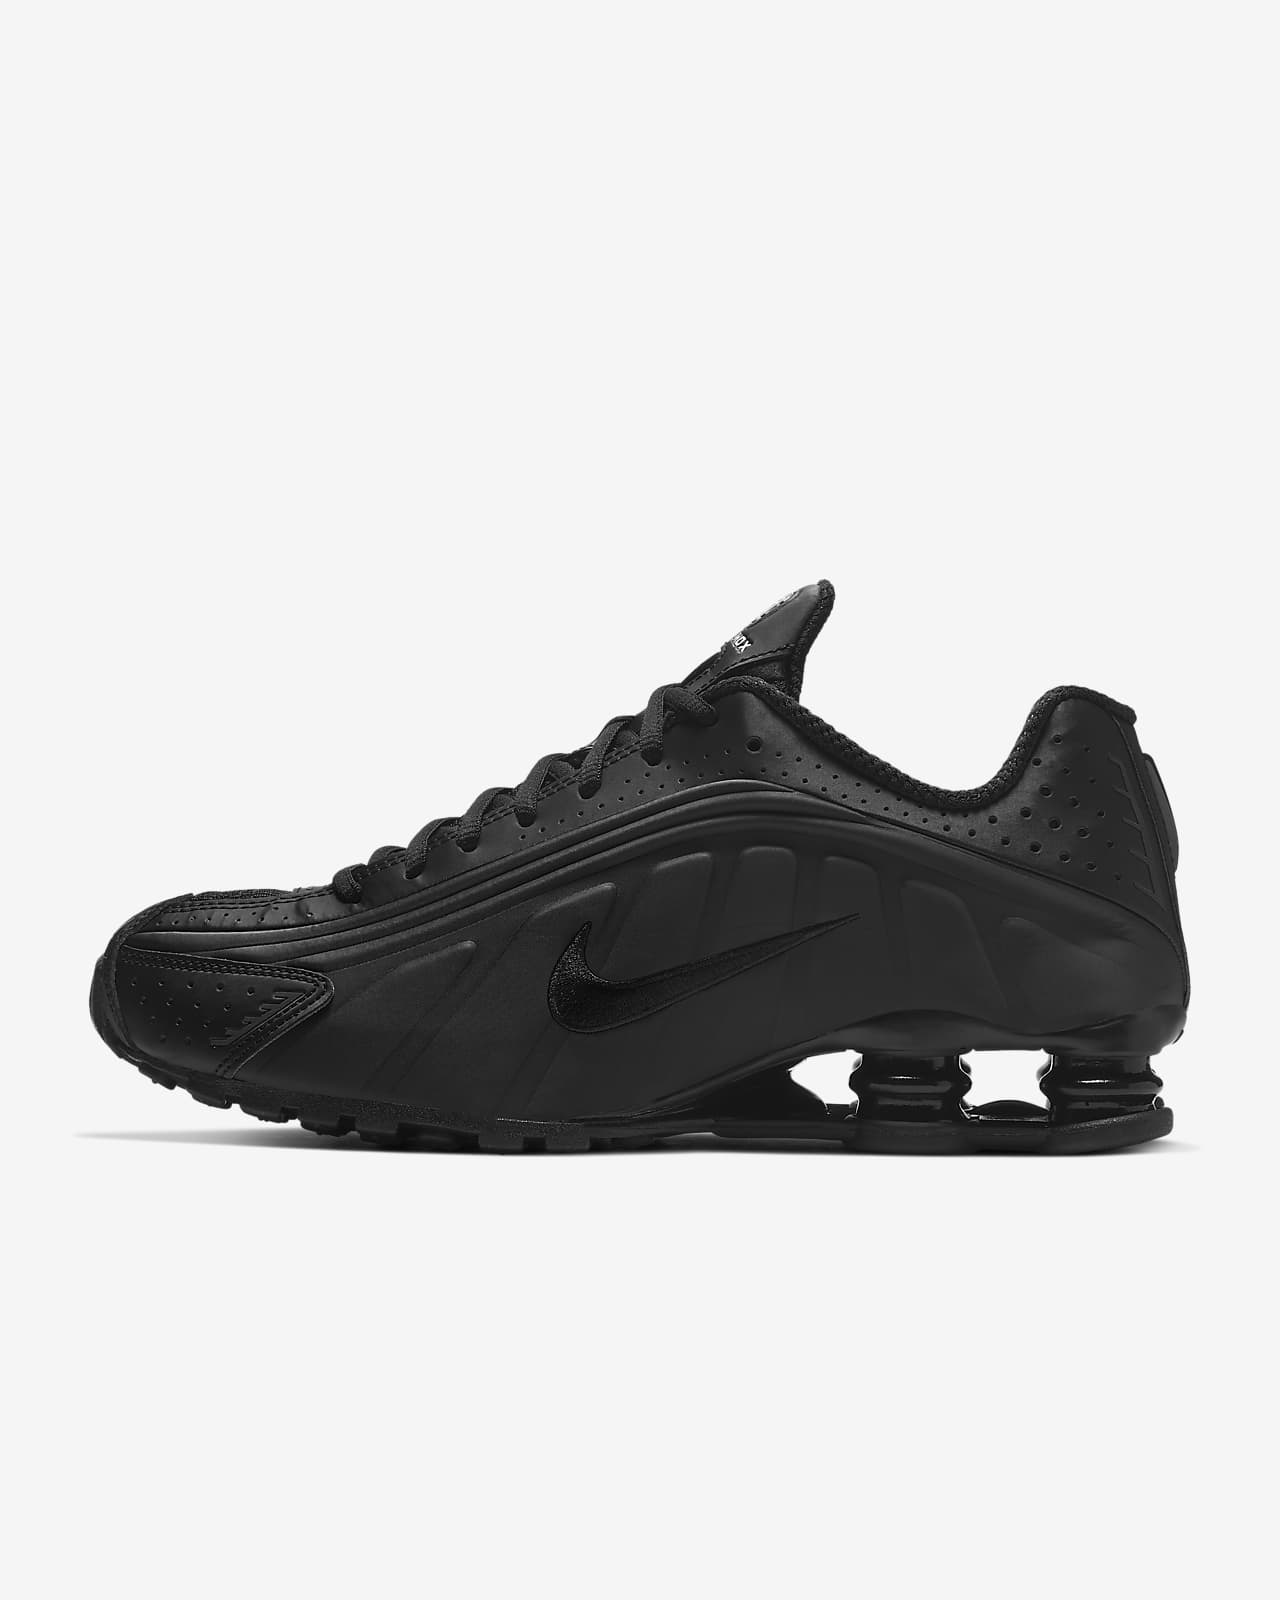 nike shox homme, OFF 76%,where to buy!